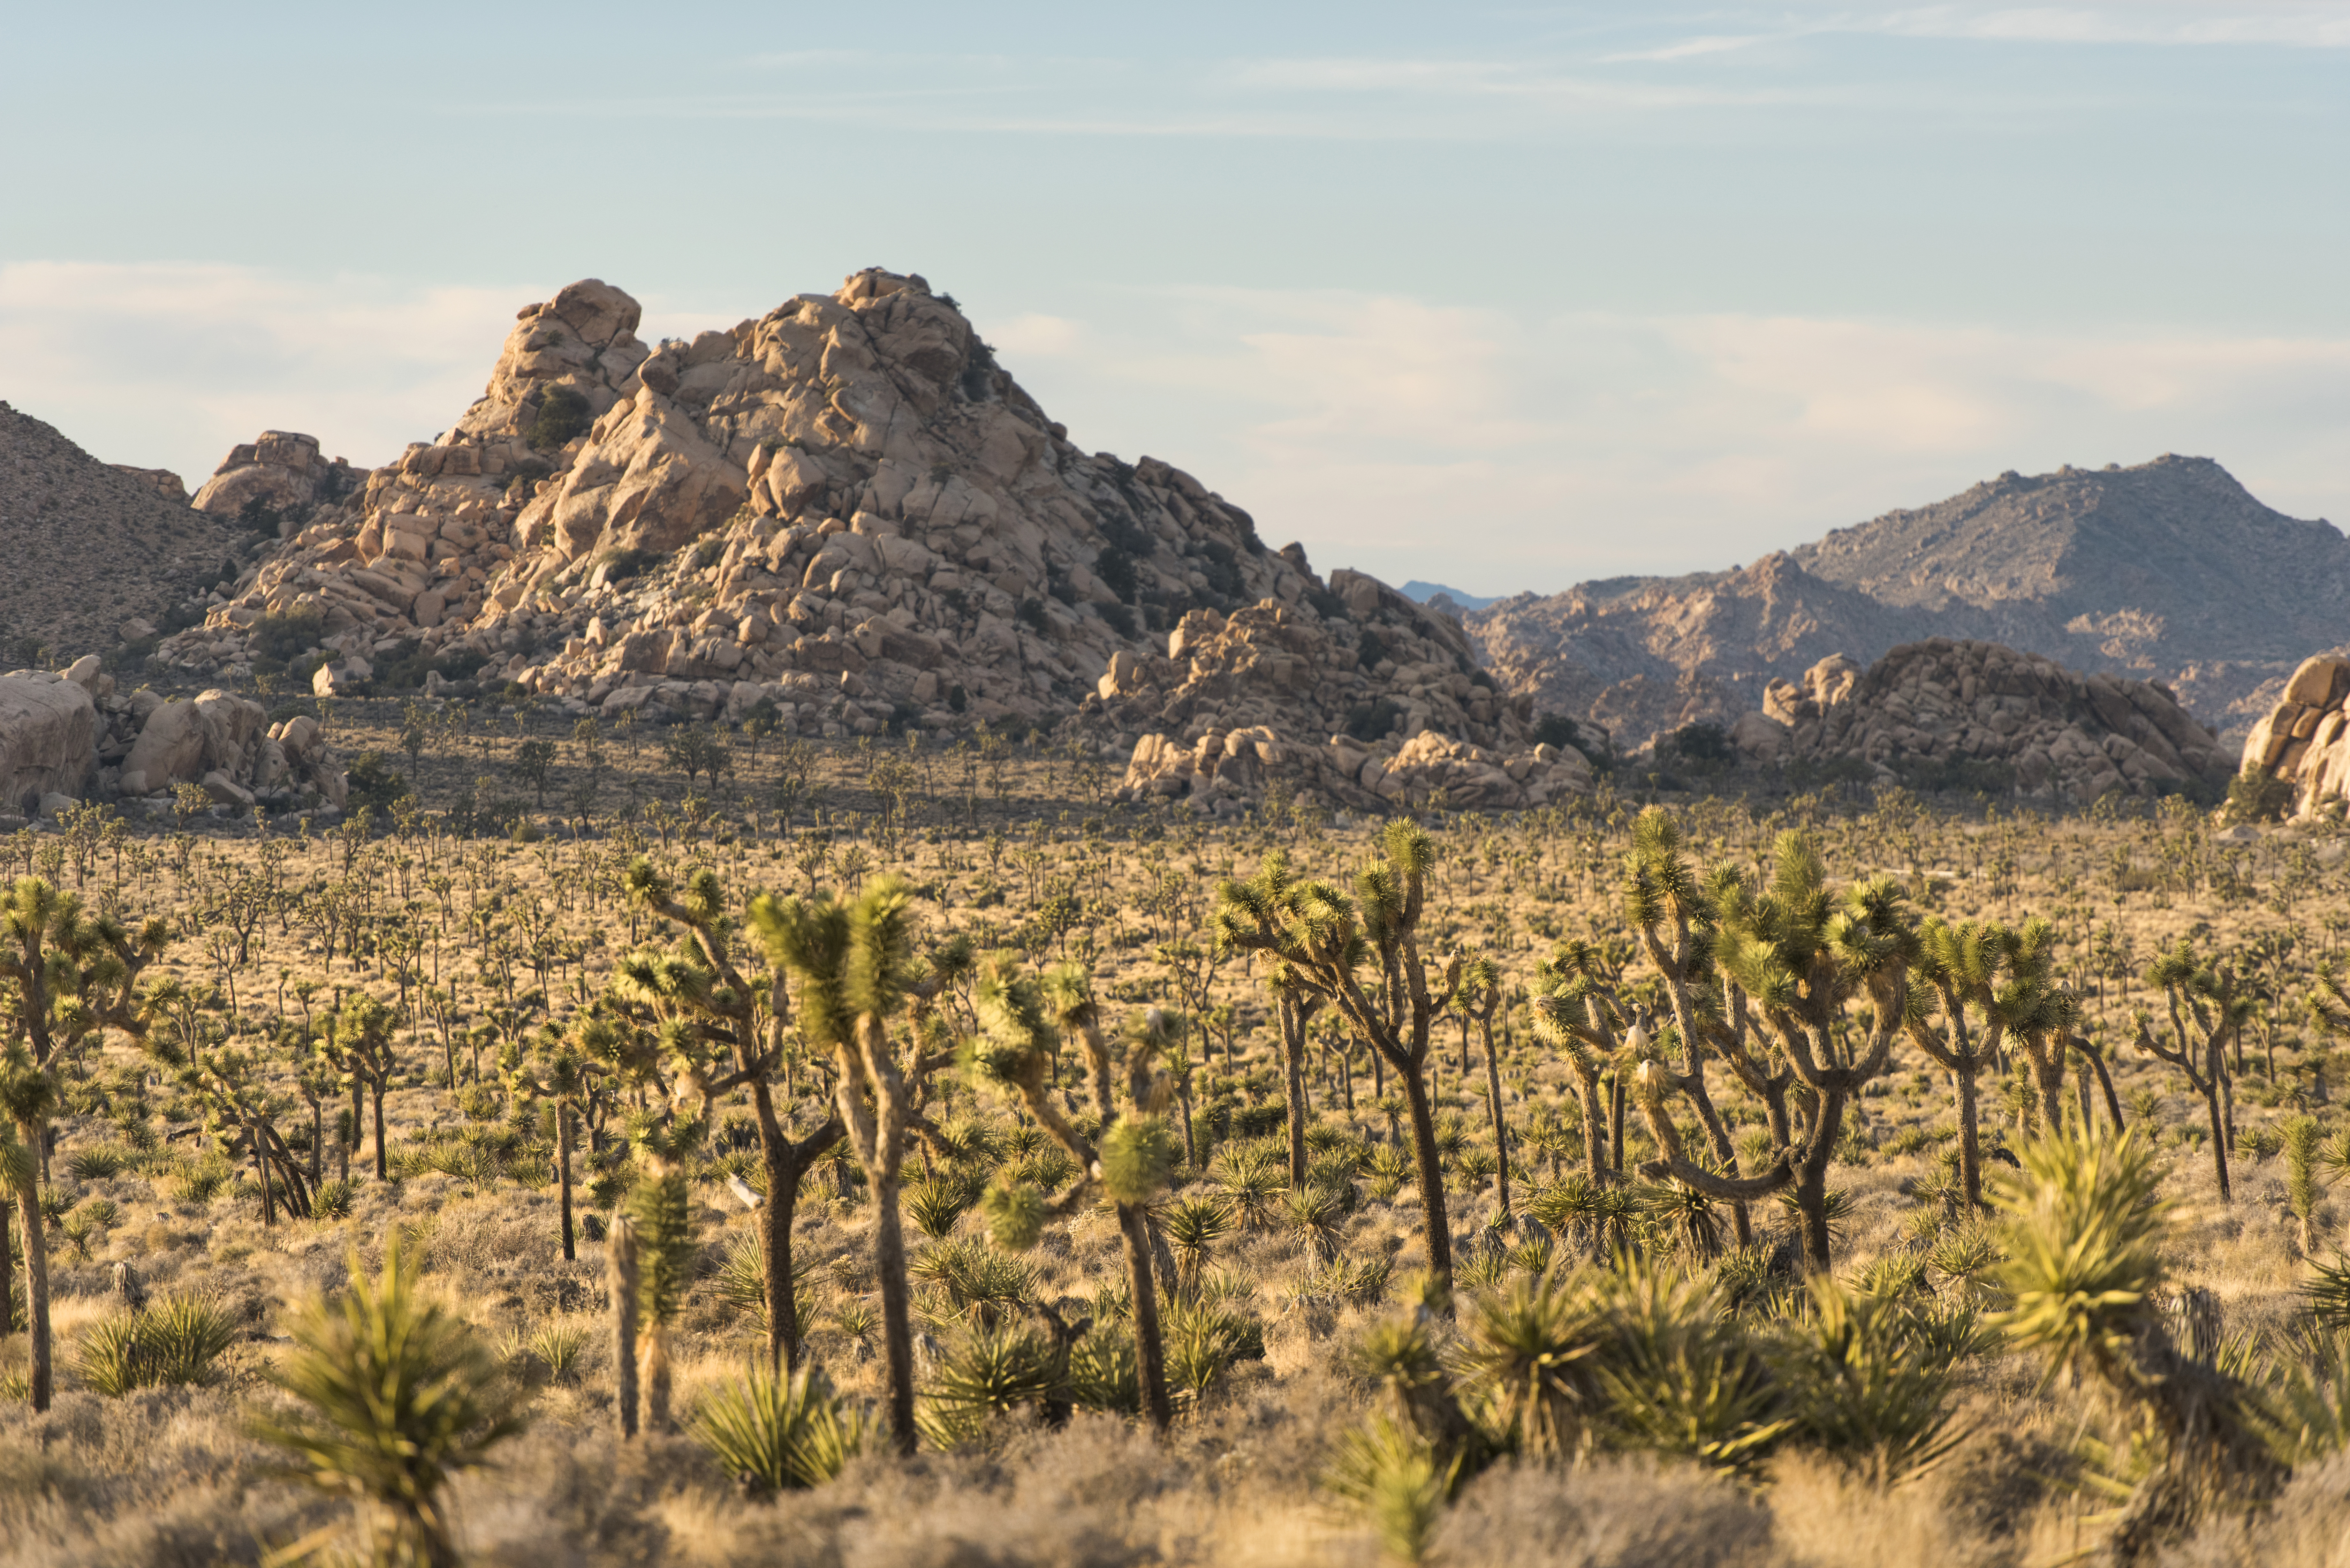 Joshua trees grow on a flat plain with boulder outcrops and mountains in the distance